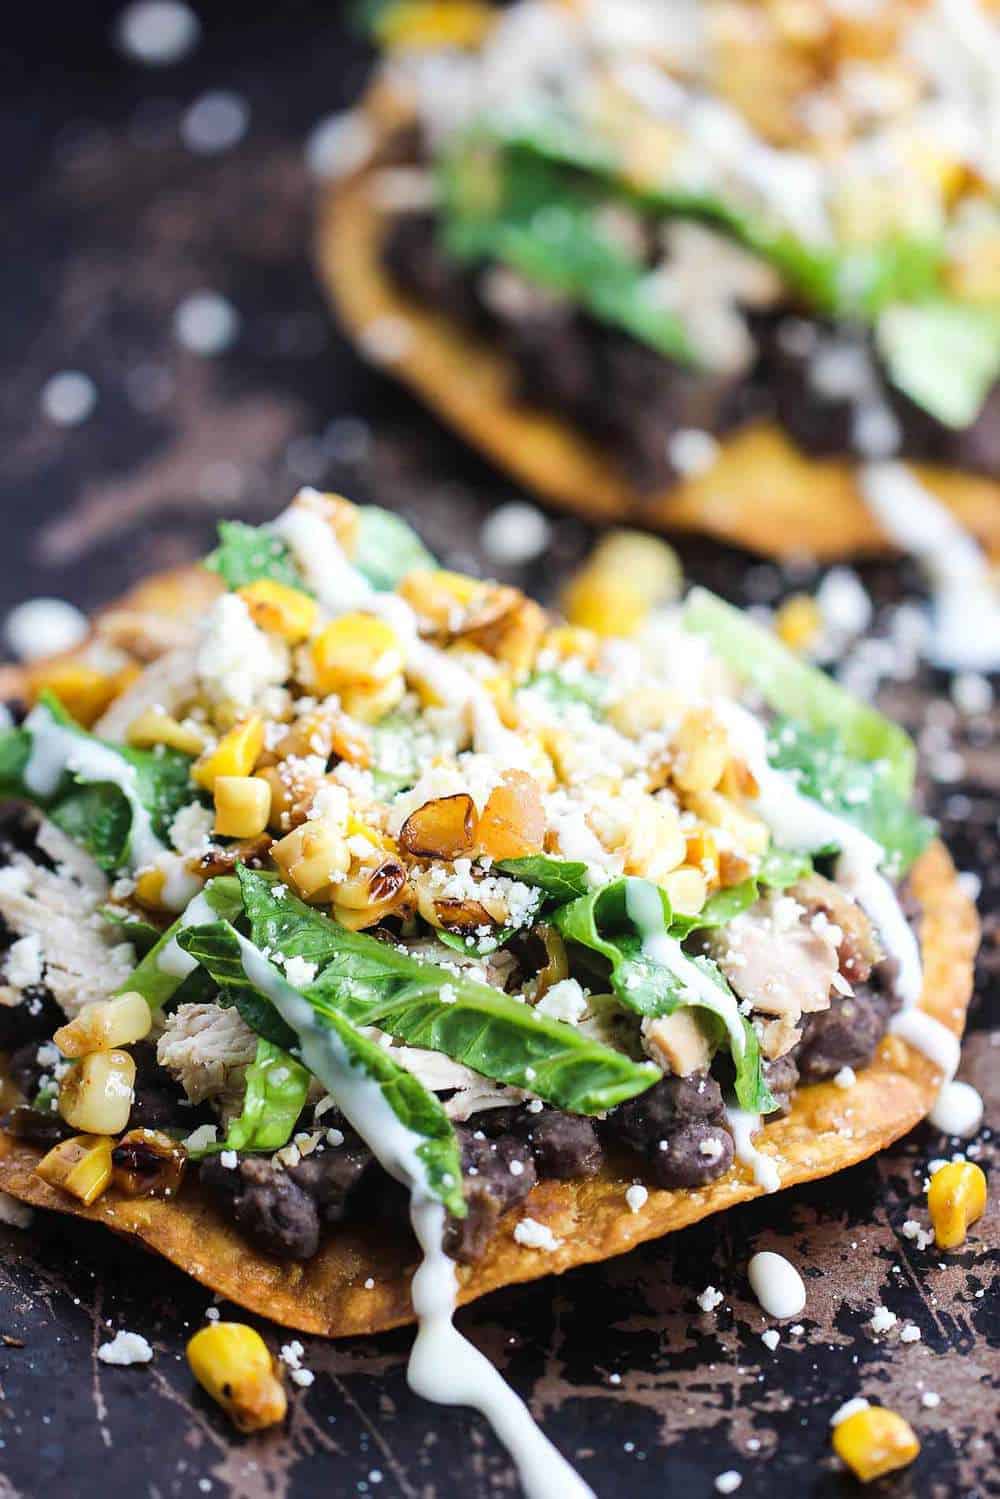 A close-up view of a black bean and roasted chicken tostada that is topped with corn salsa, lettuce, and Mexican crema sitting on a scratchy black baking pan